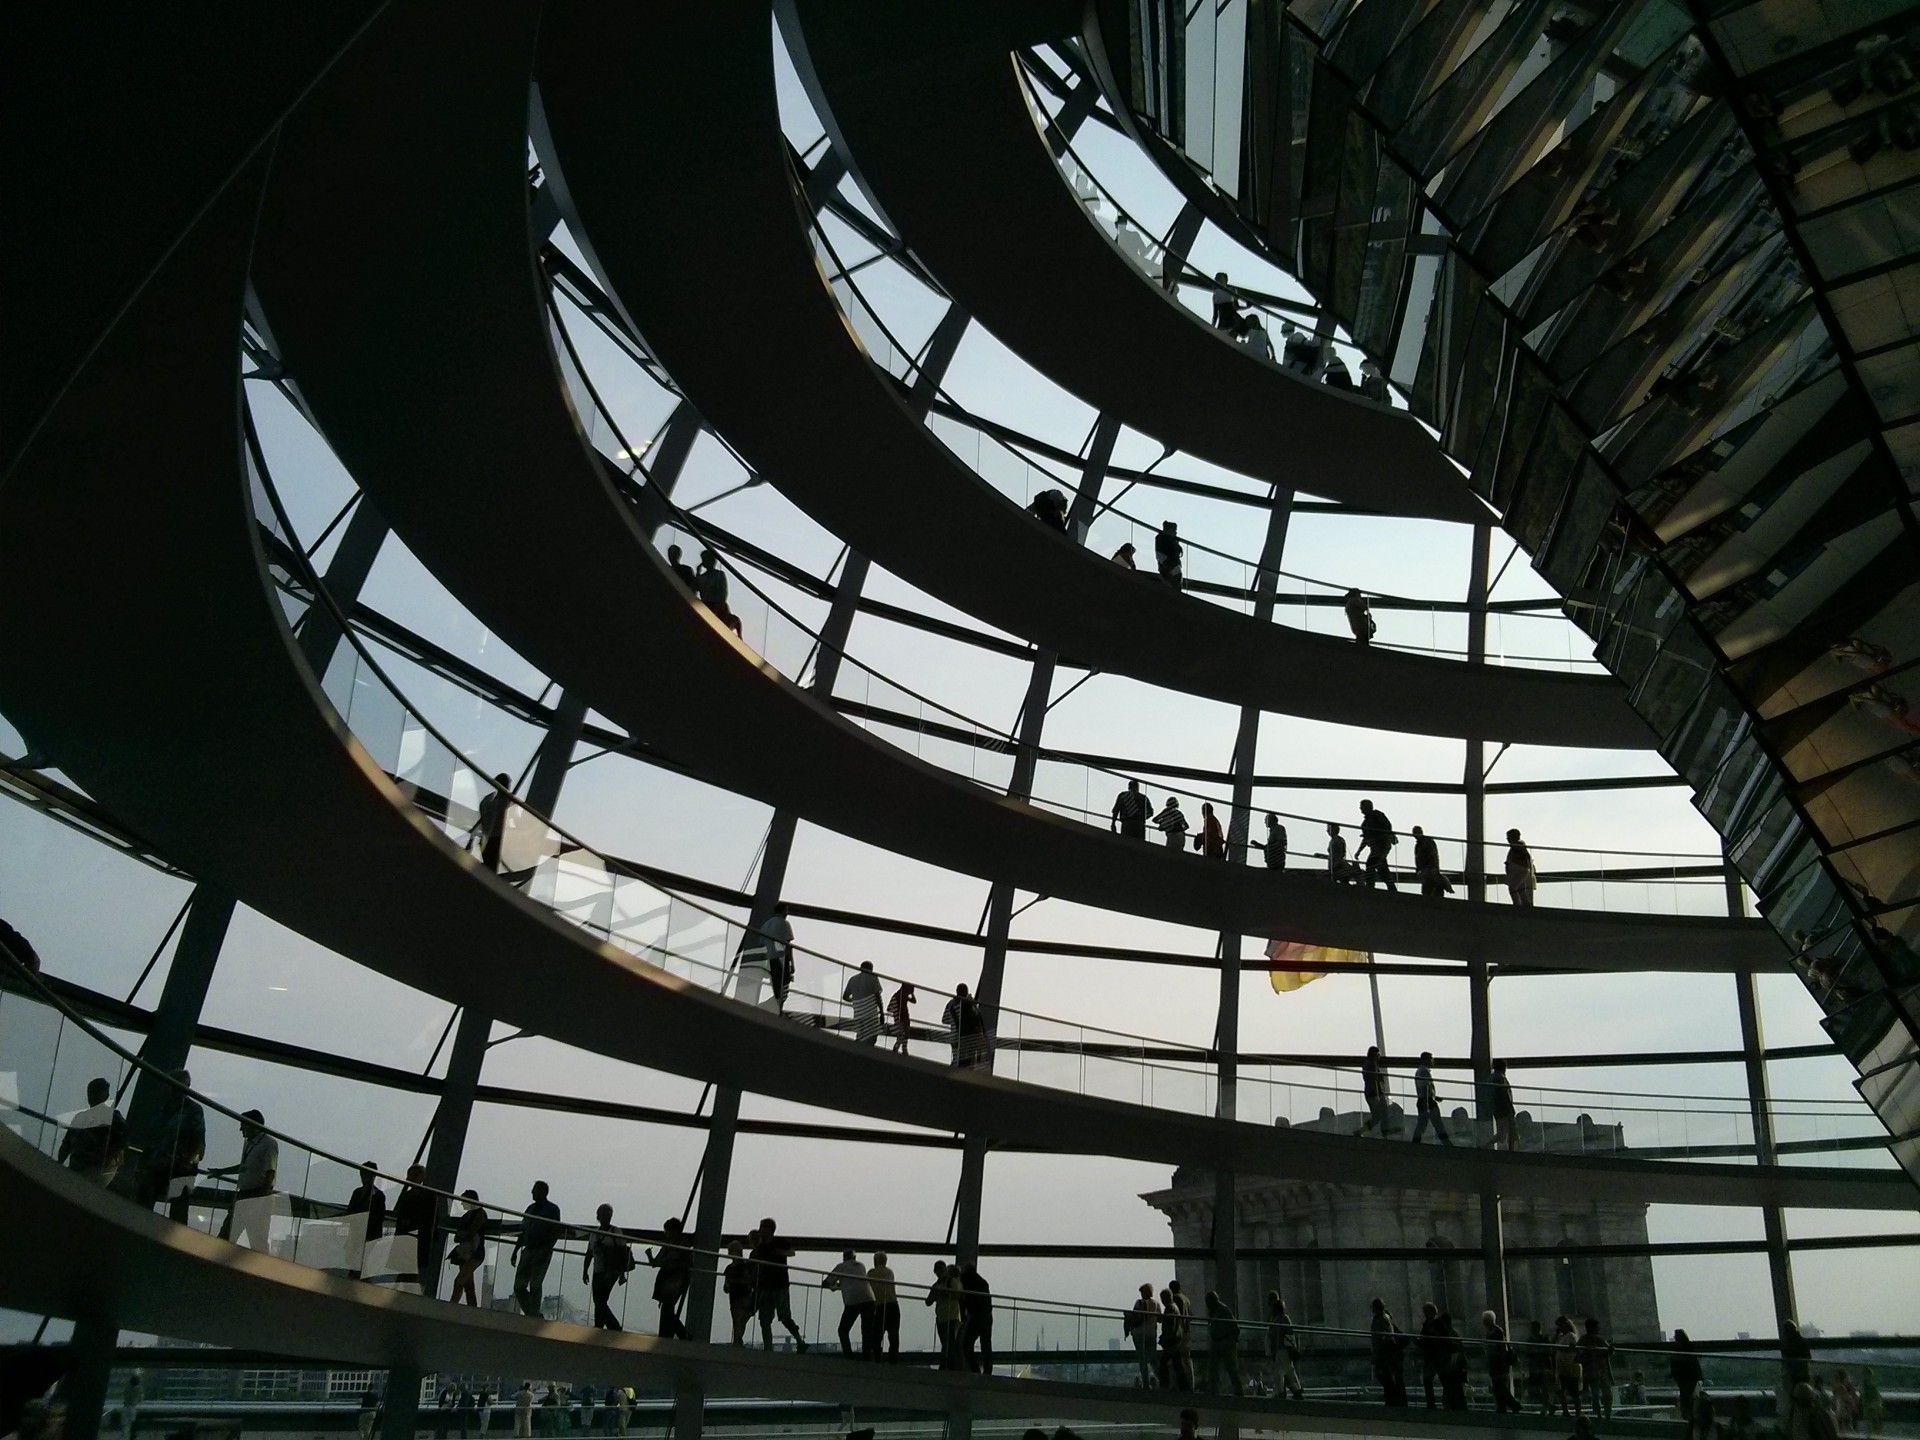 berlin dome reichstag free photo